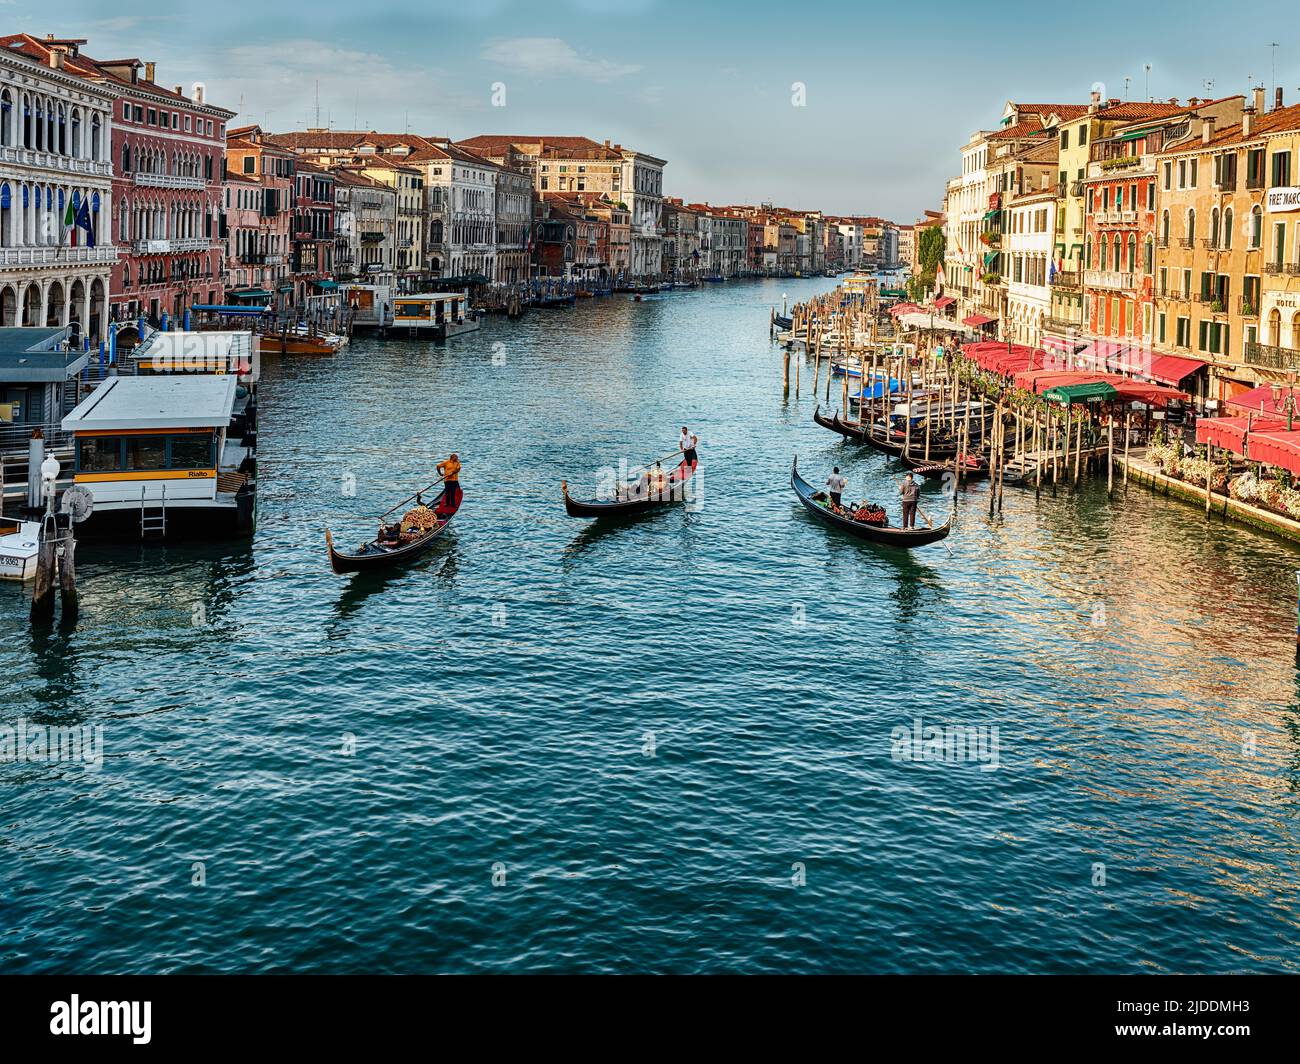 Three gondolas travel on the Grand Canal in Venice as seen from the Rialto Bridge early on a sunny morning. Stock Photo